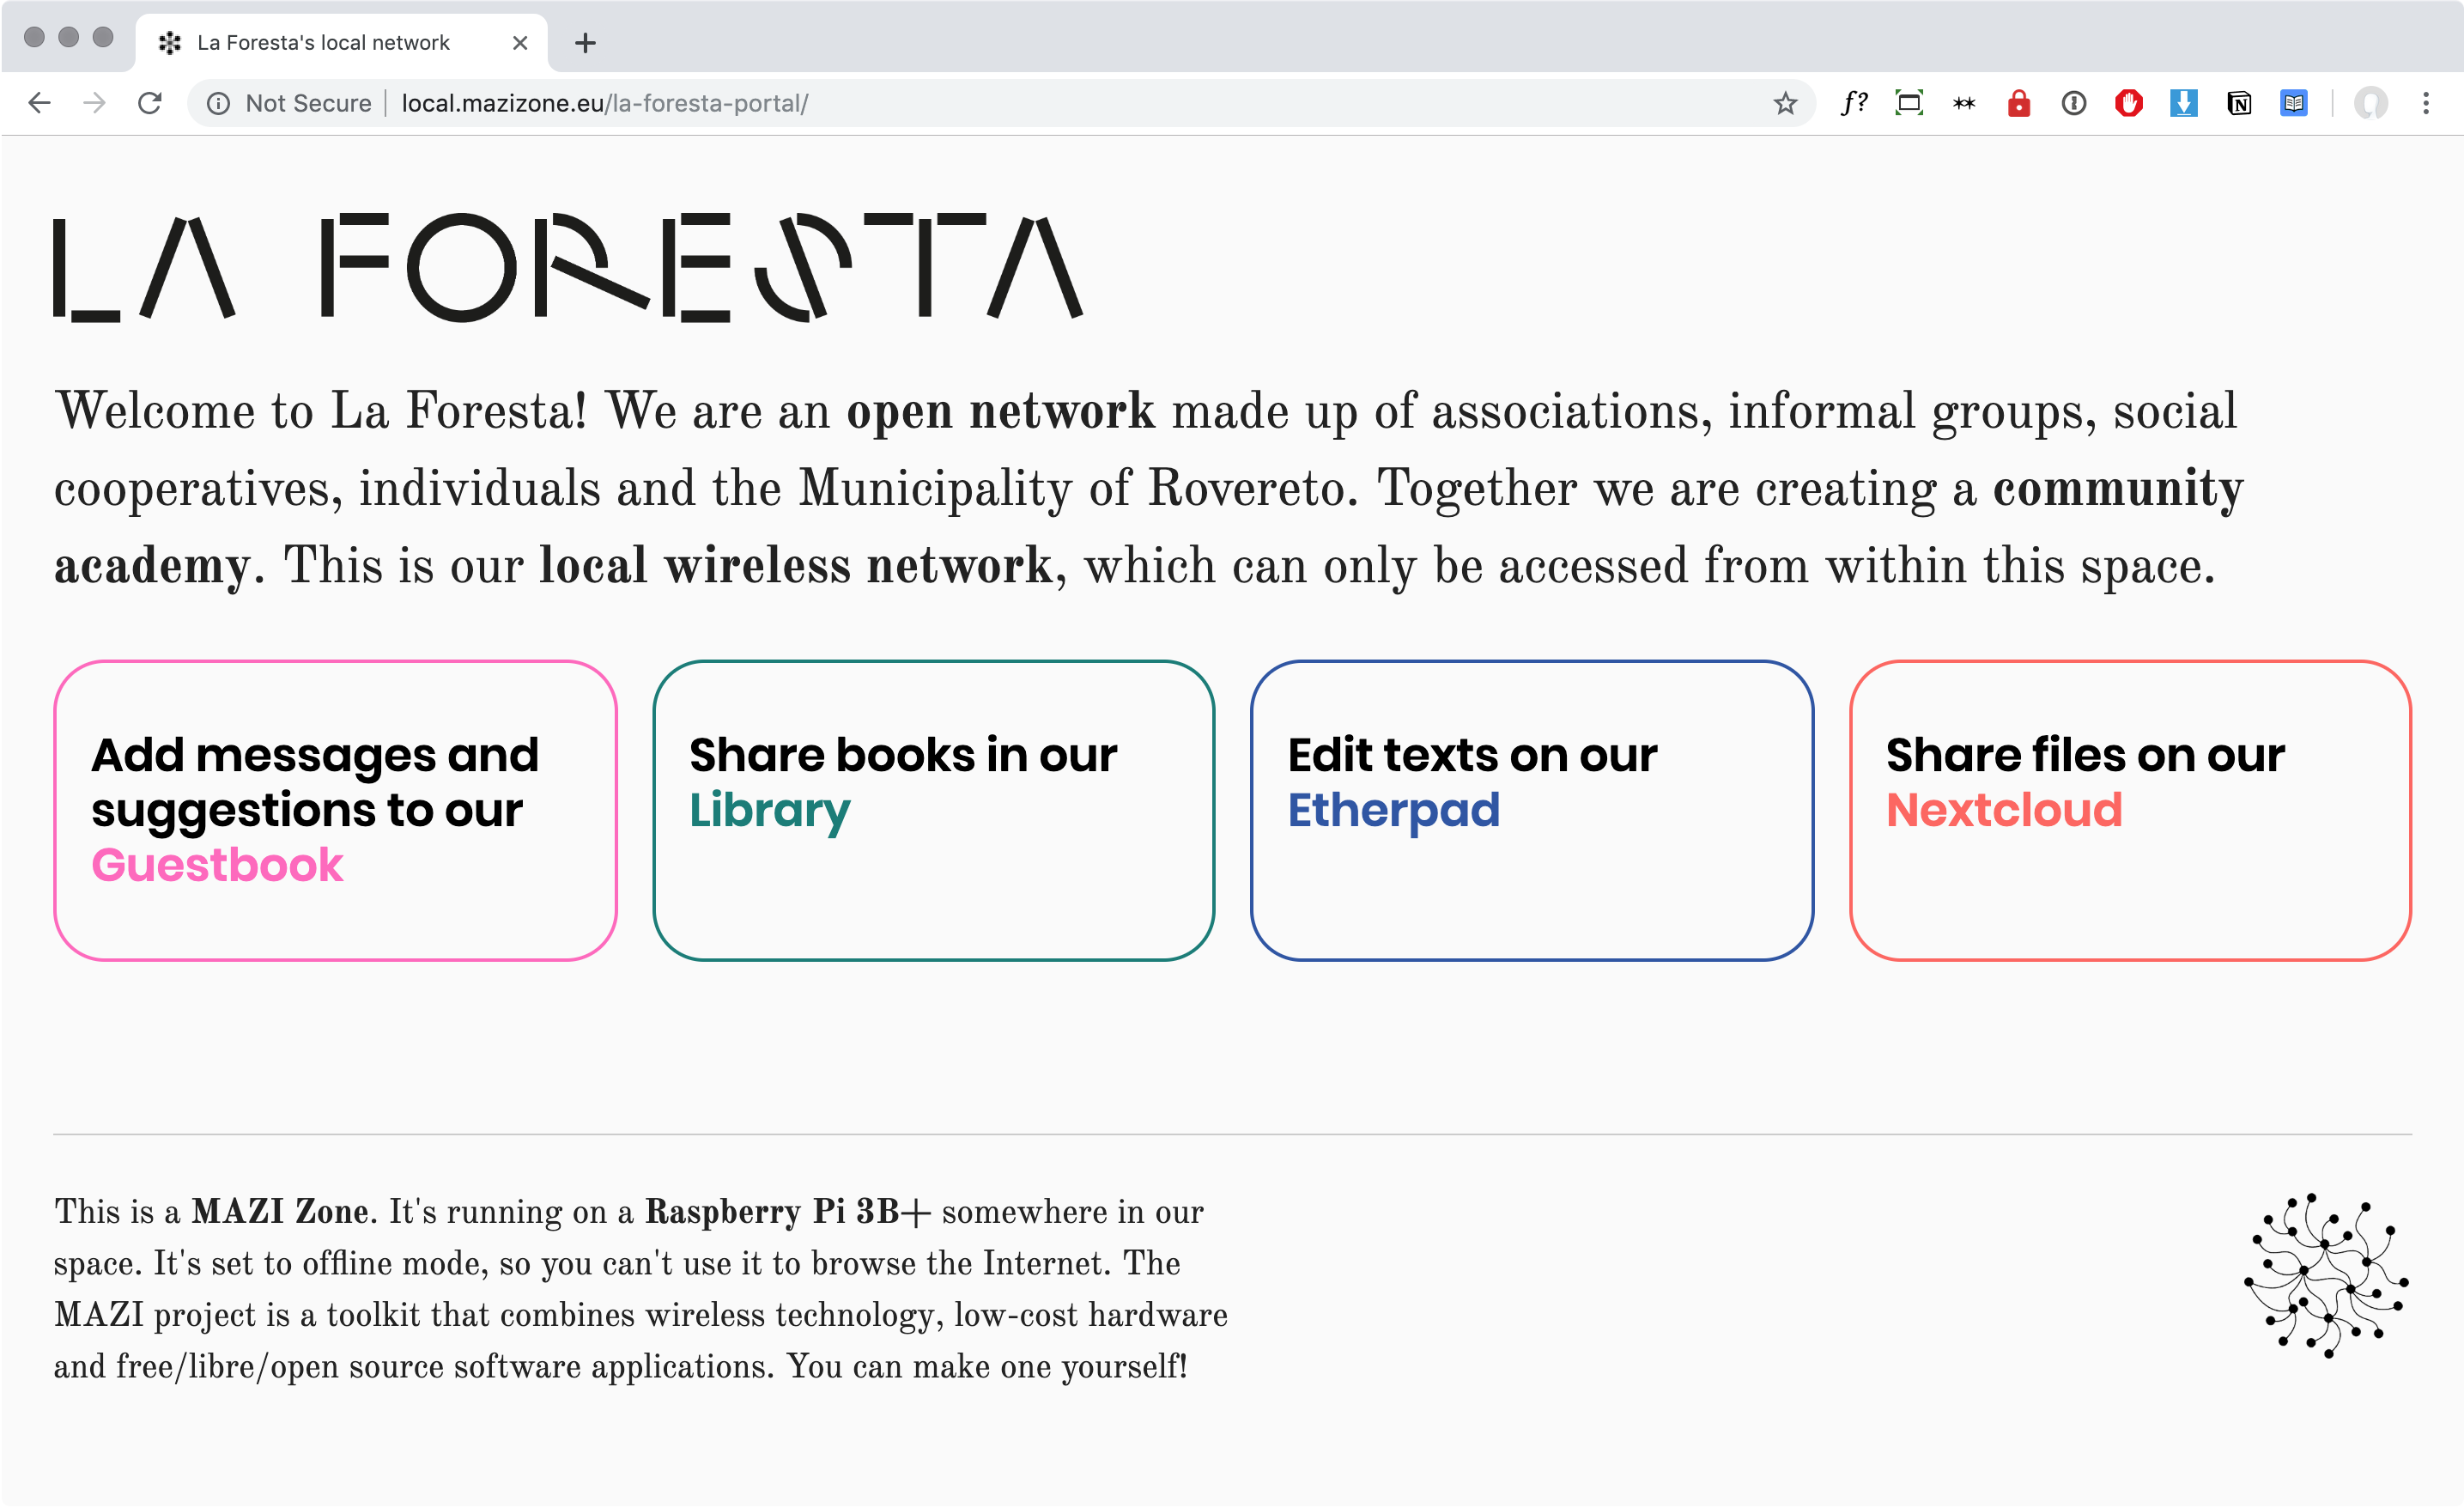 A screenshot showing homepage portal for La Foresta's local network